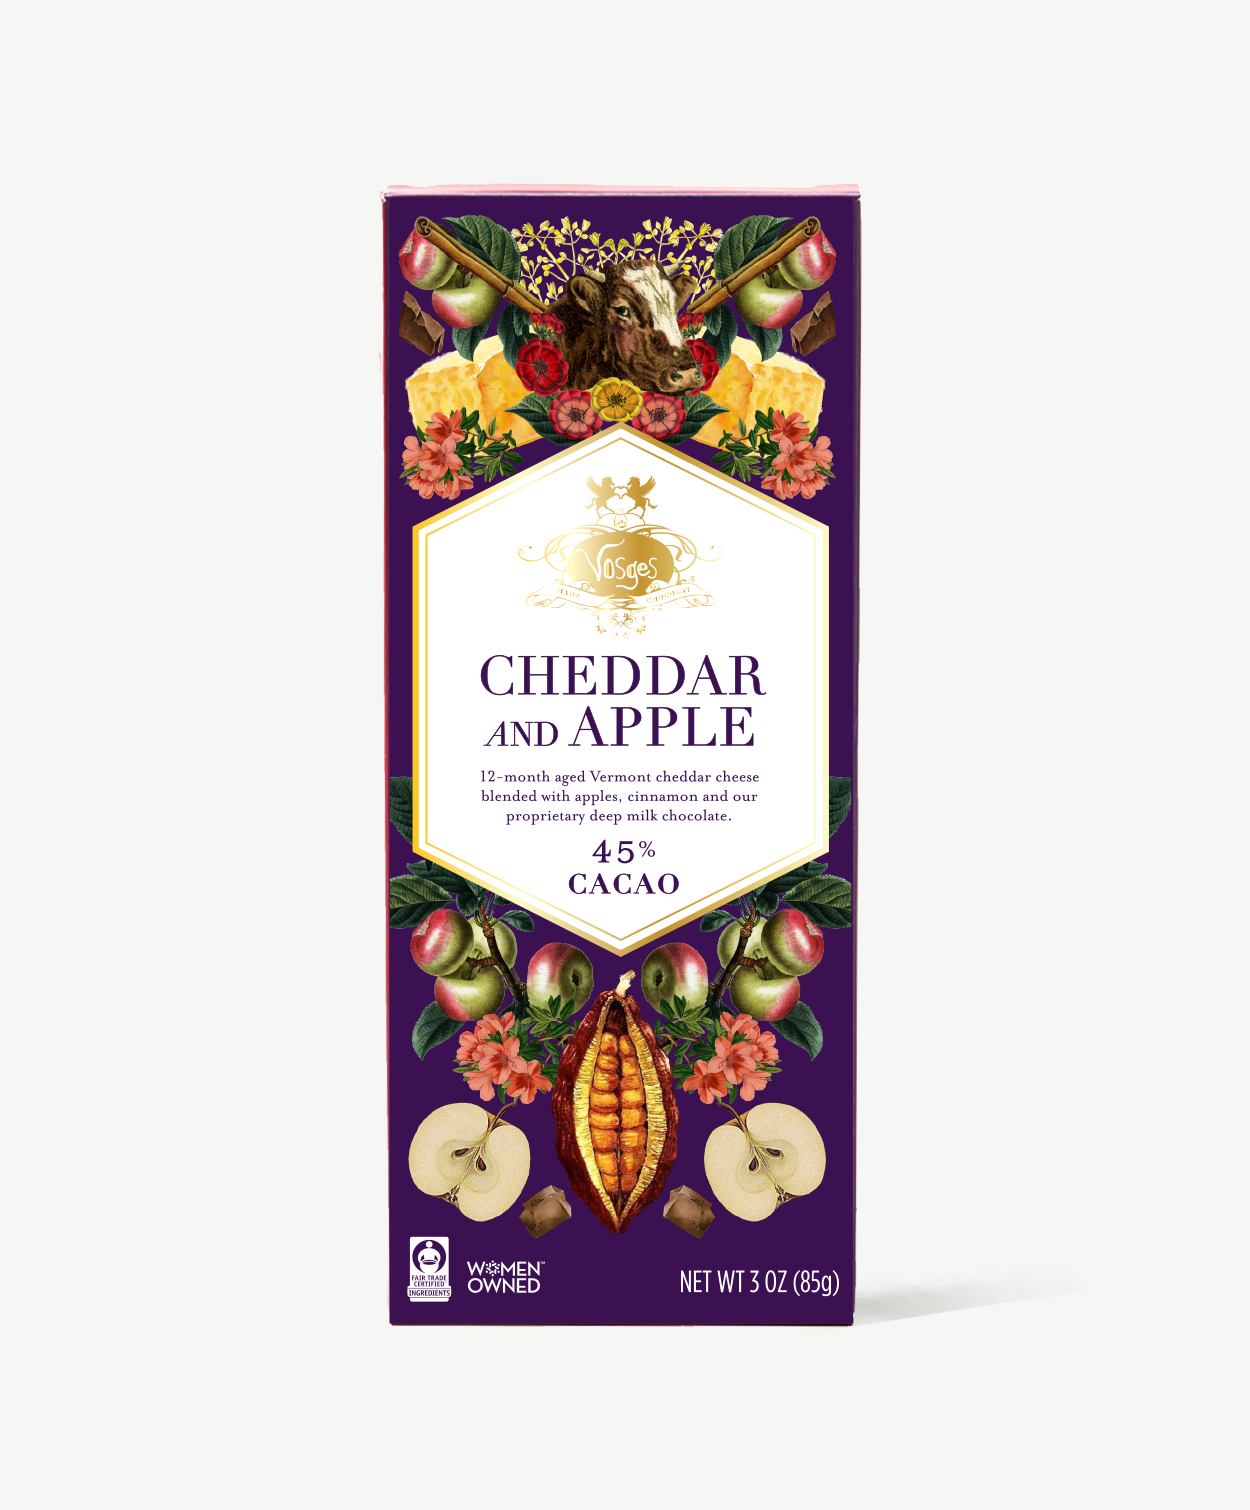 Vosges Cheddar and Apple bar stands upright displaying a purple box wrapper featuring illustrations of fruit and flowers on a grey background.